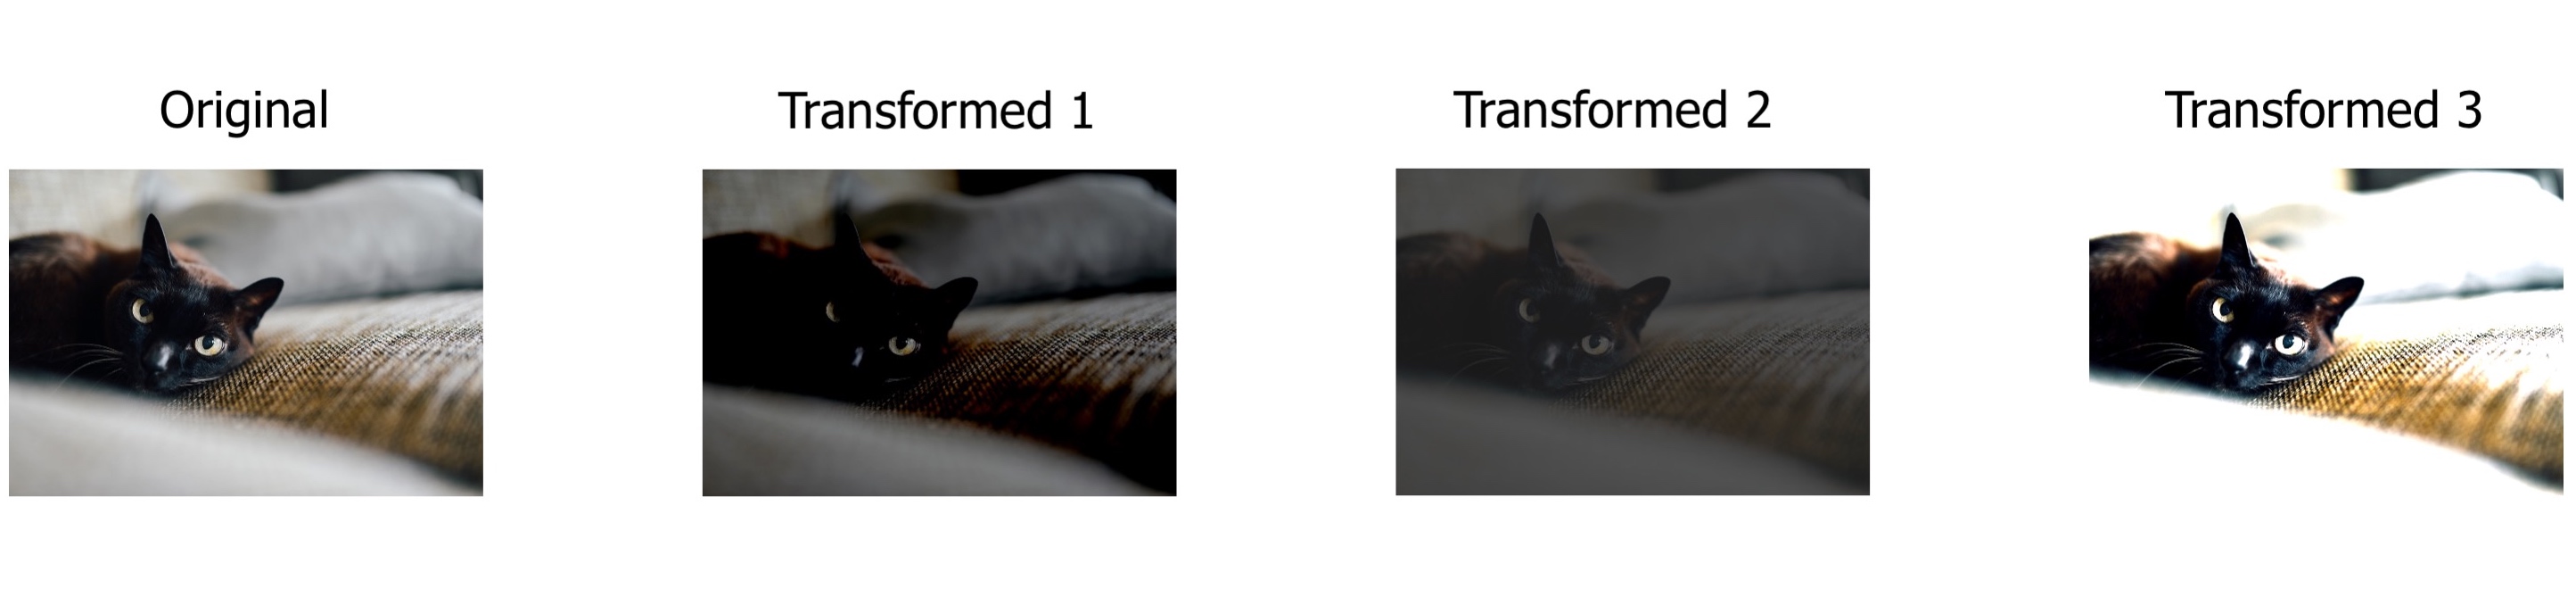 Passing the same image multiple times to transform will produce different output images